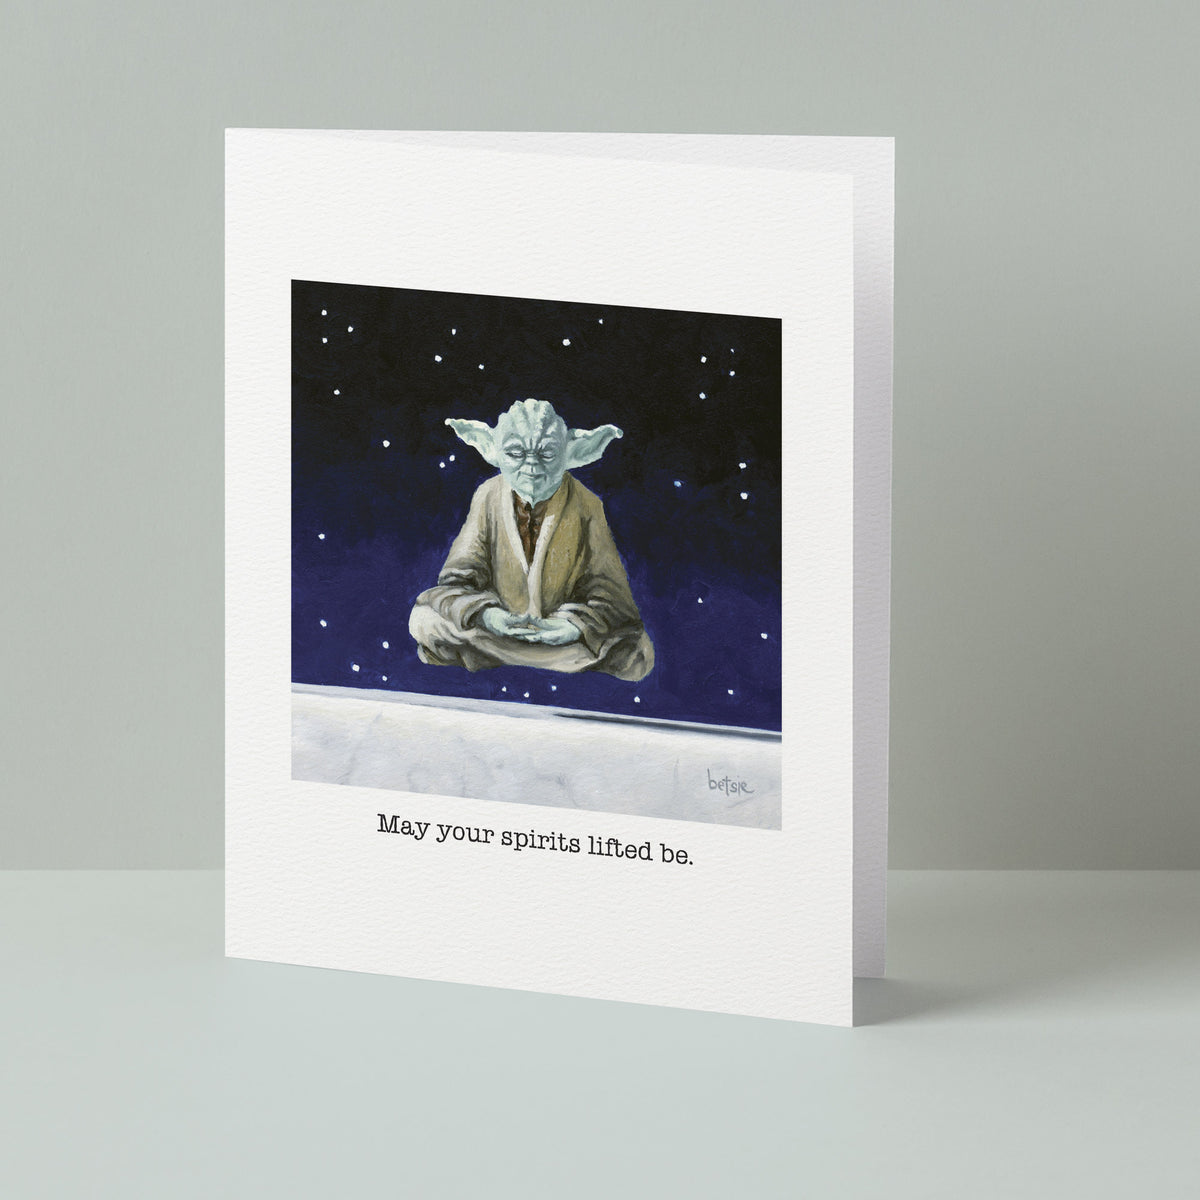 "May your spirits lifted be" Greeting Card